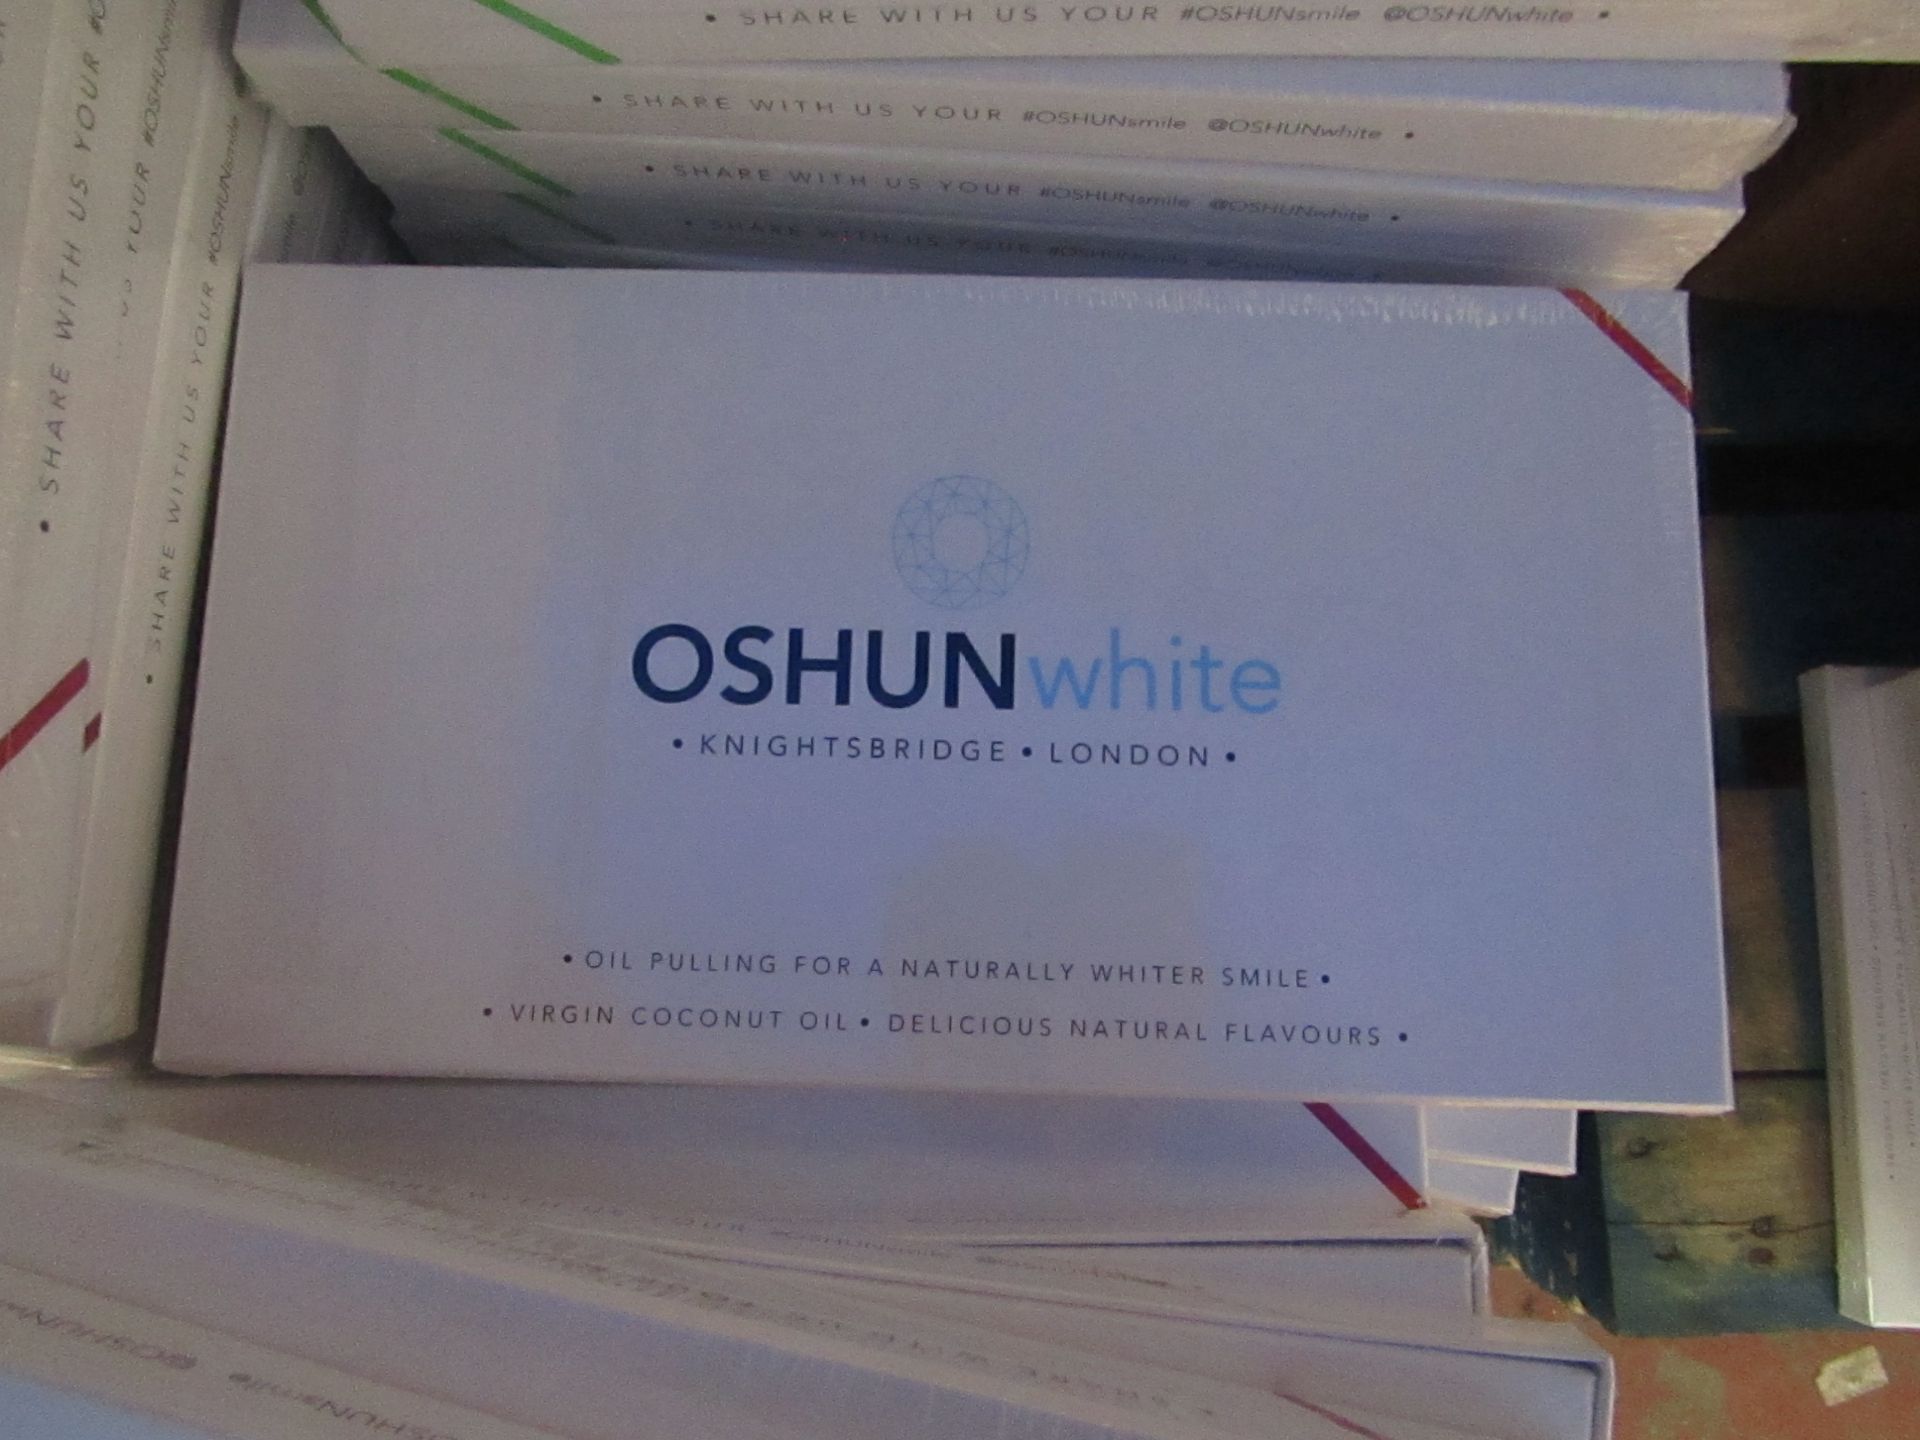 100 packs x Oshun White Teeth Whitening Wild Cherry Flavour BB May 2017 but completely sealed